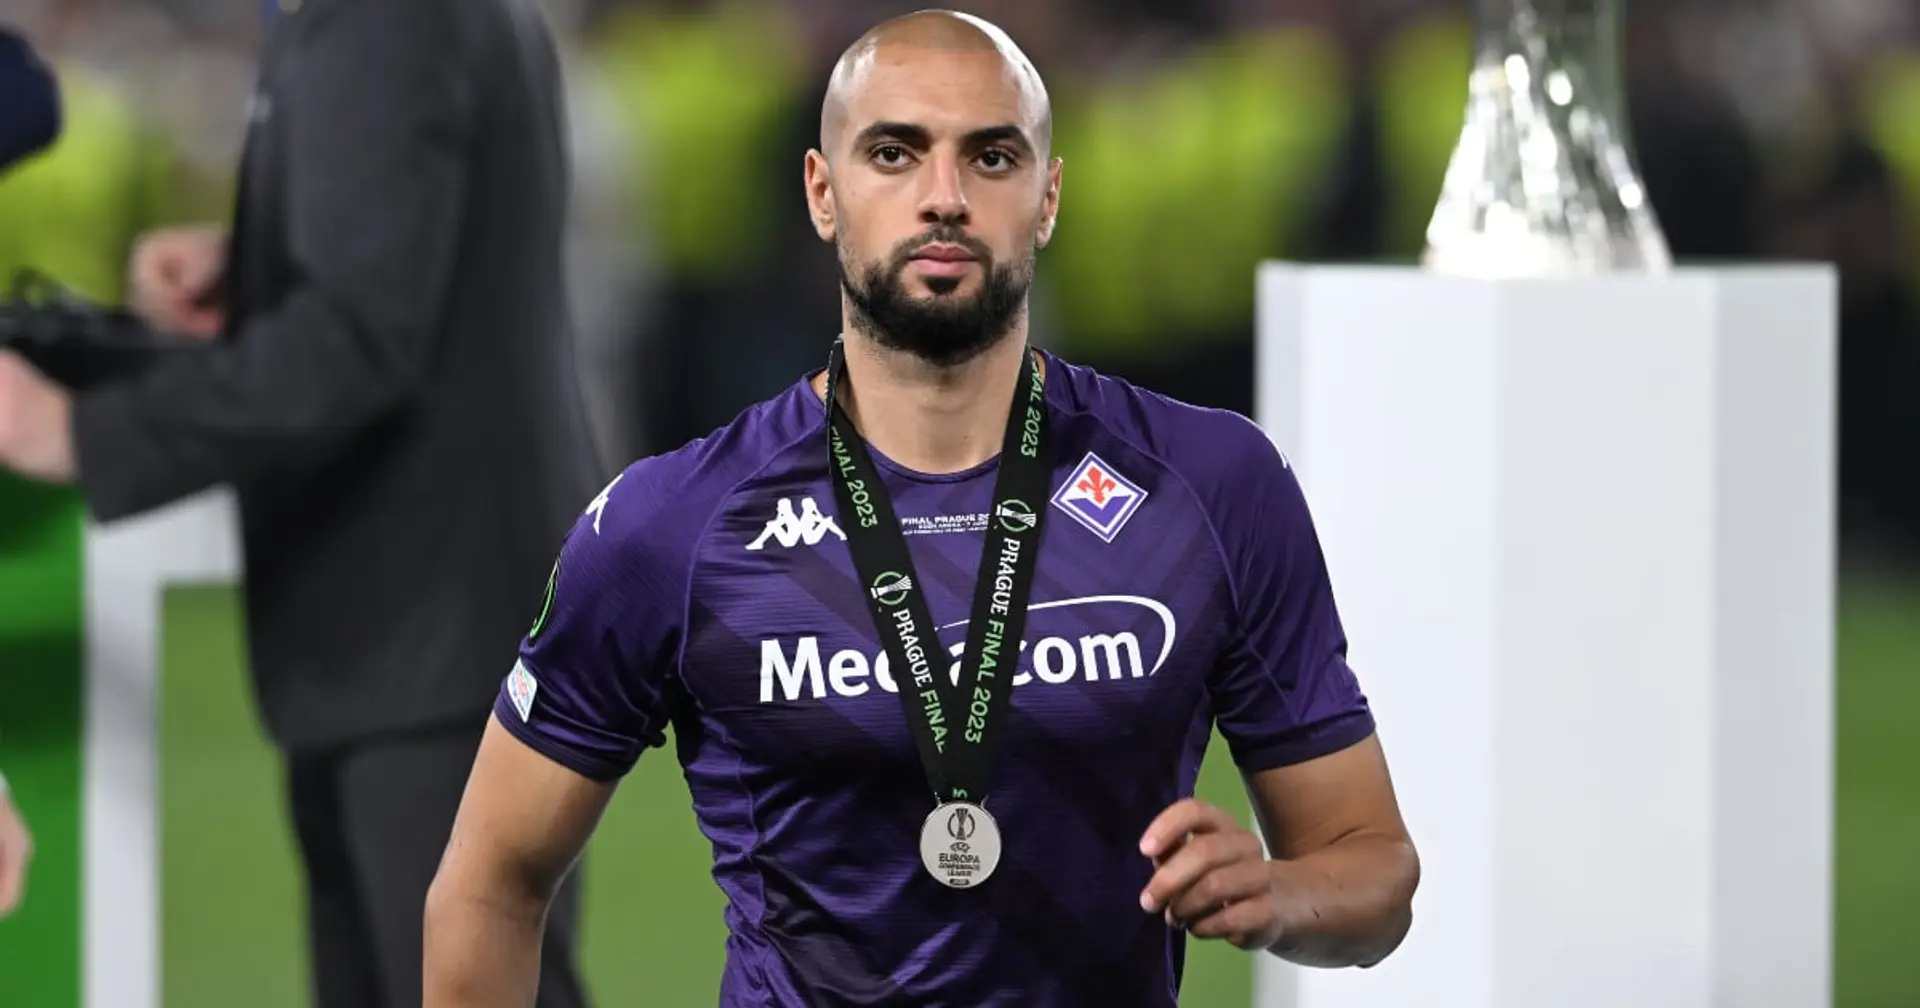 Make an offer or Amrabat stays: Fiorentina issue transfer ultimatum to Man United (reliability: 4 stars) 